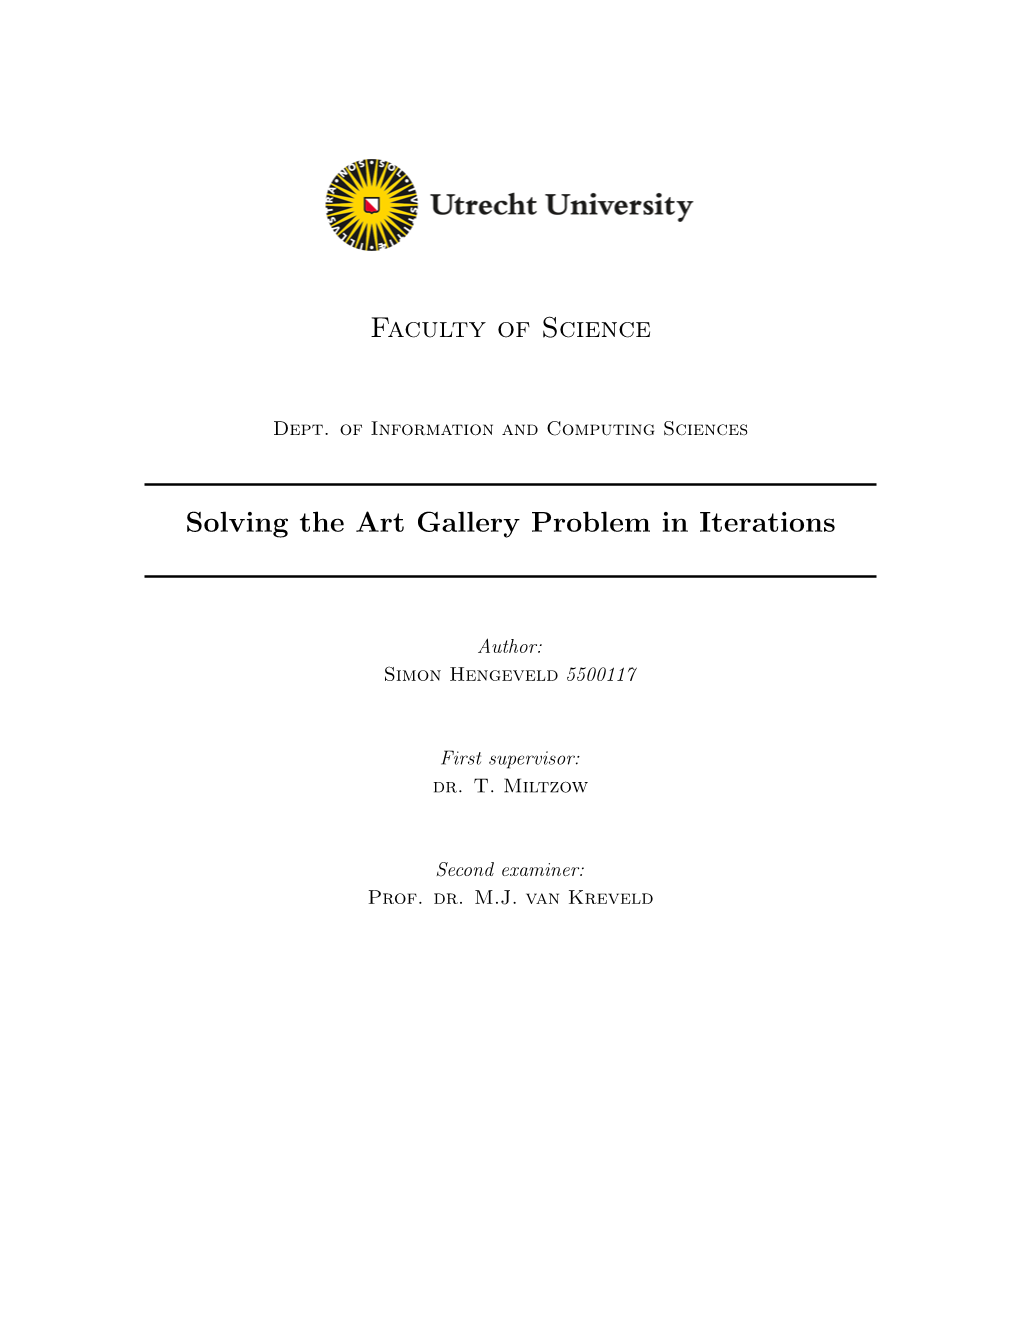 Faculty of Science Solving the Art Gallery Problem in Iterations